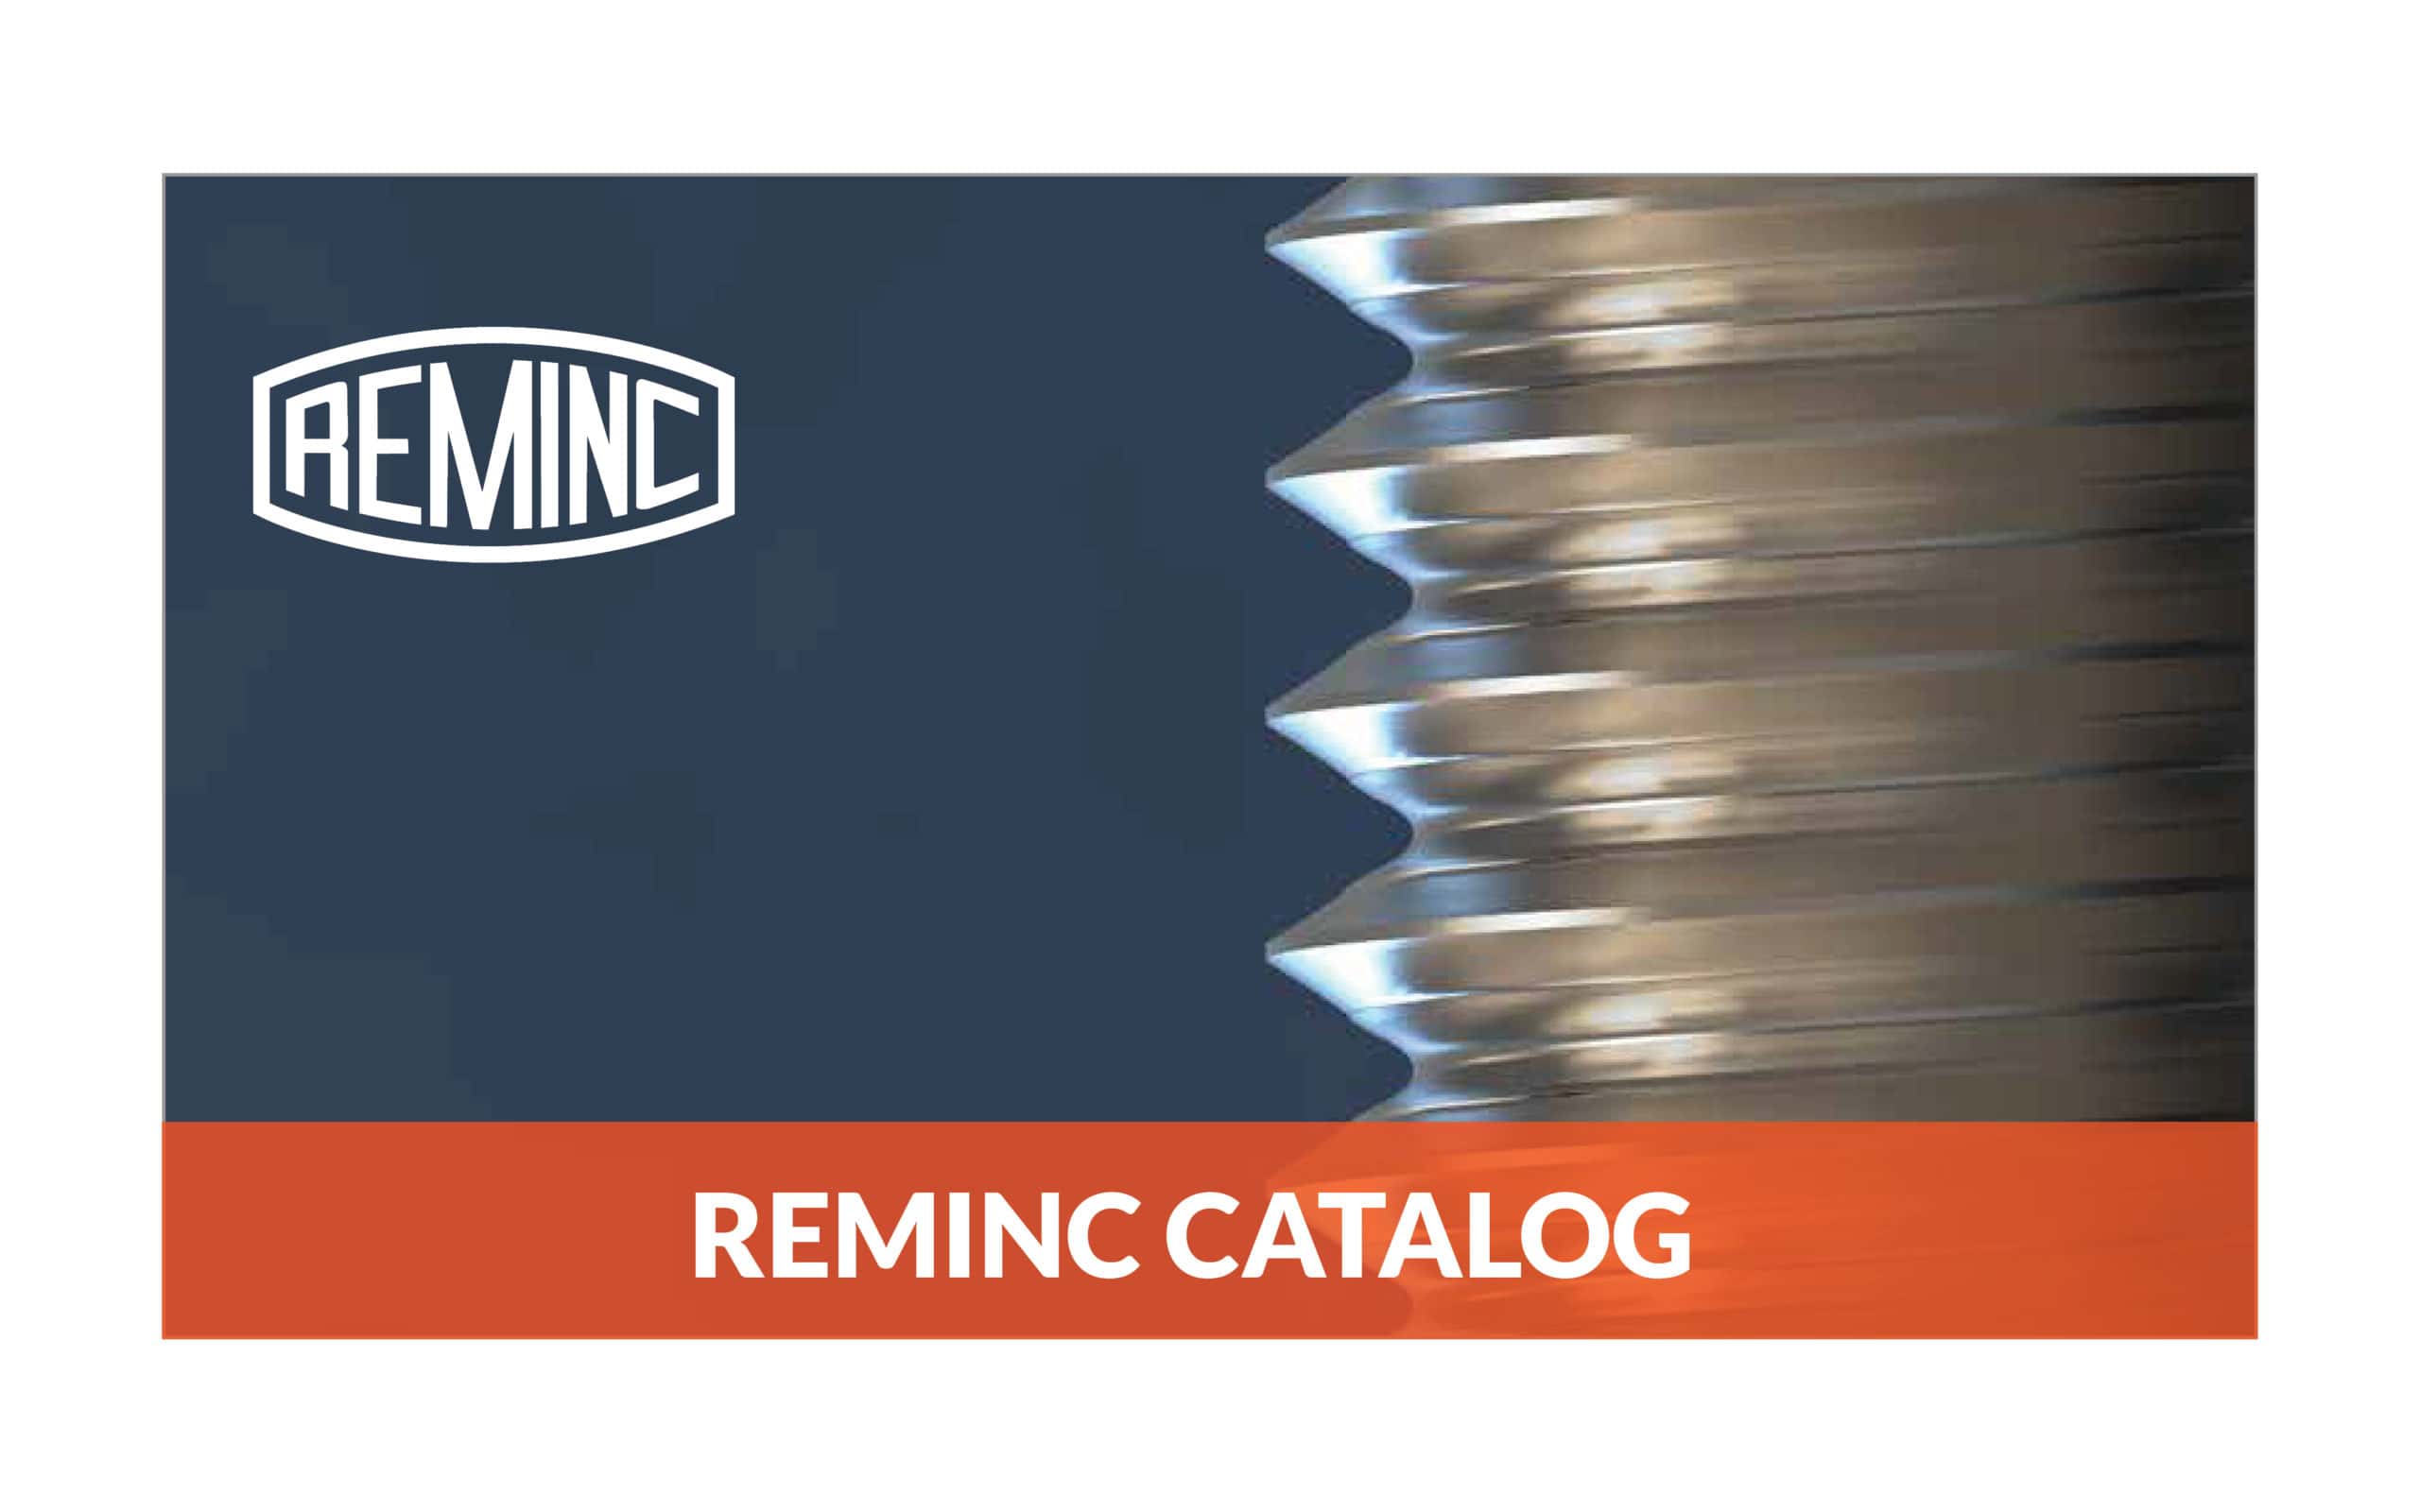 REMINC logo Leaders in thread forming, vibration resistant fasteners eliminate material and labor costs such as tapping, washers, nuts, locking adhesives, and other manufacturing components and processes.